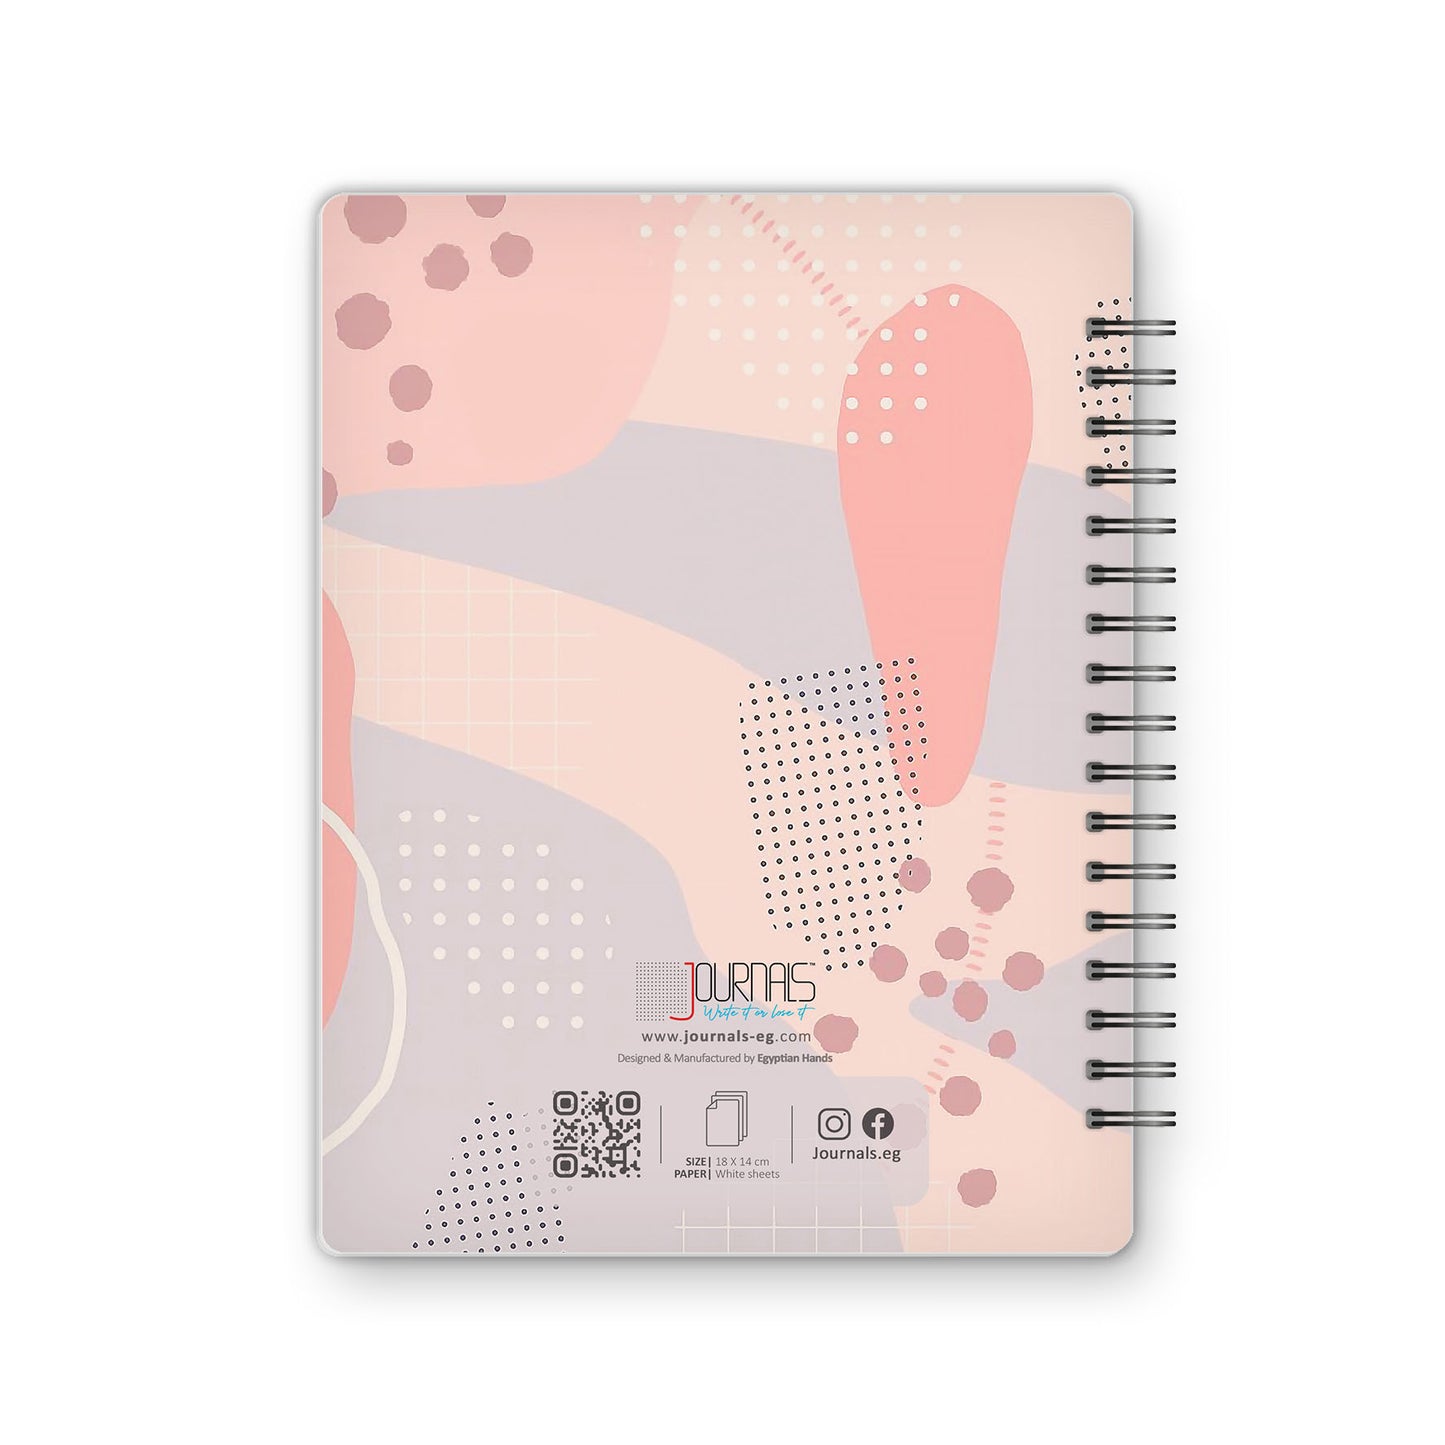 Square Grid - 18X14 cm - 75 Sheets | Pink Leaf 03 - from Journals